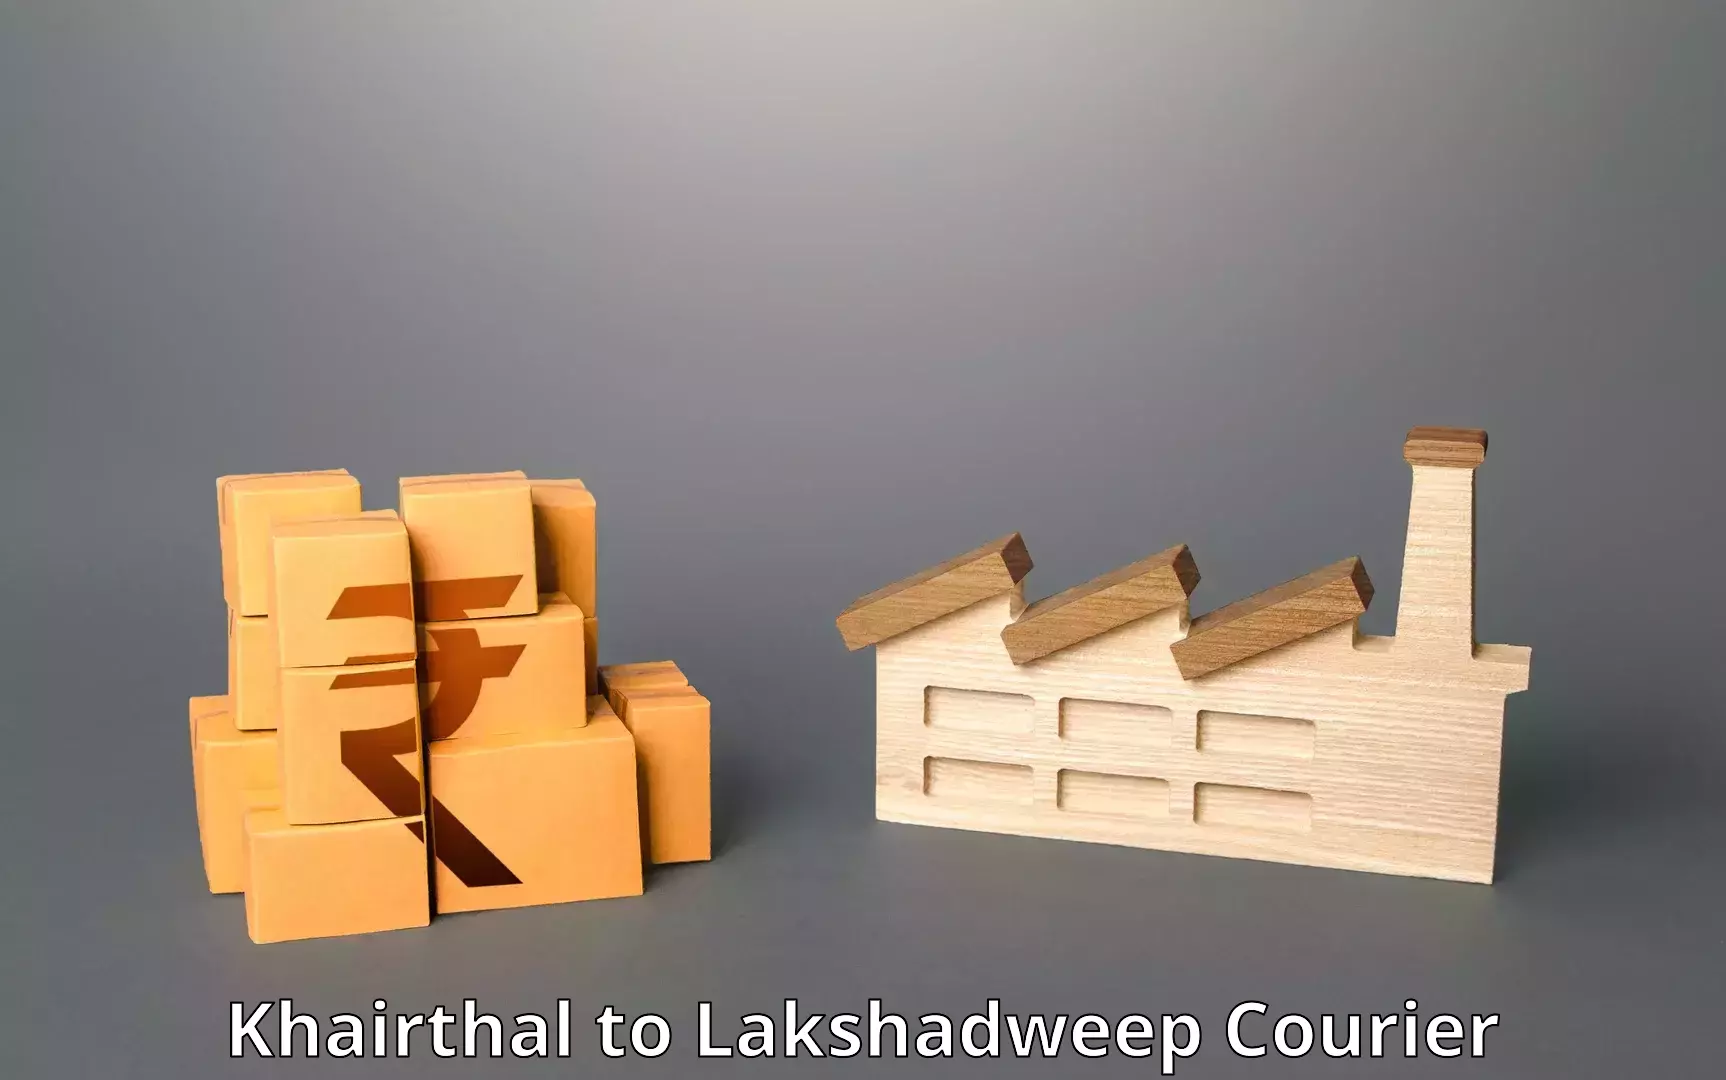 Express mail service Khairthal to Lakshadweep